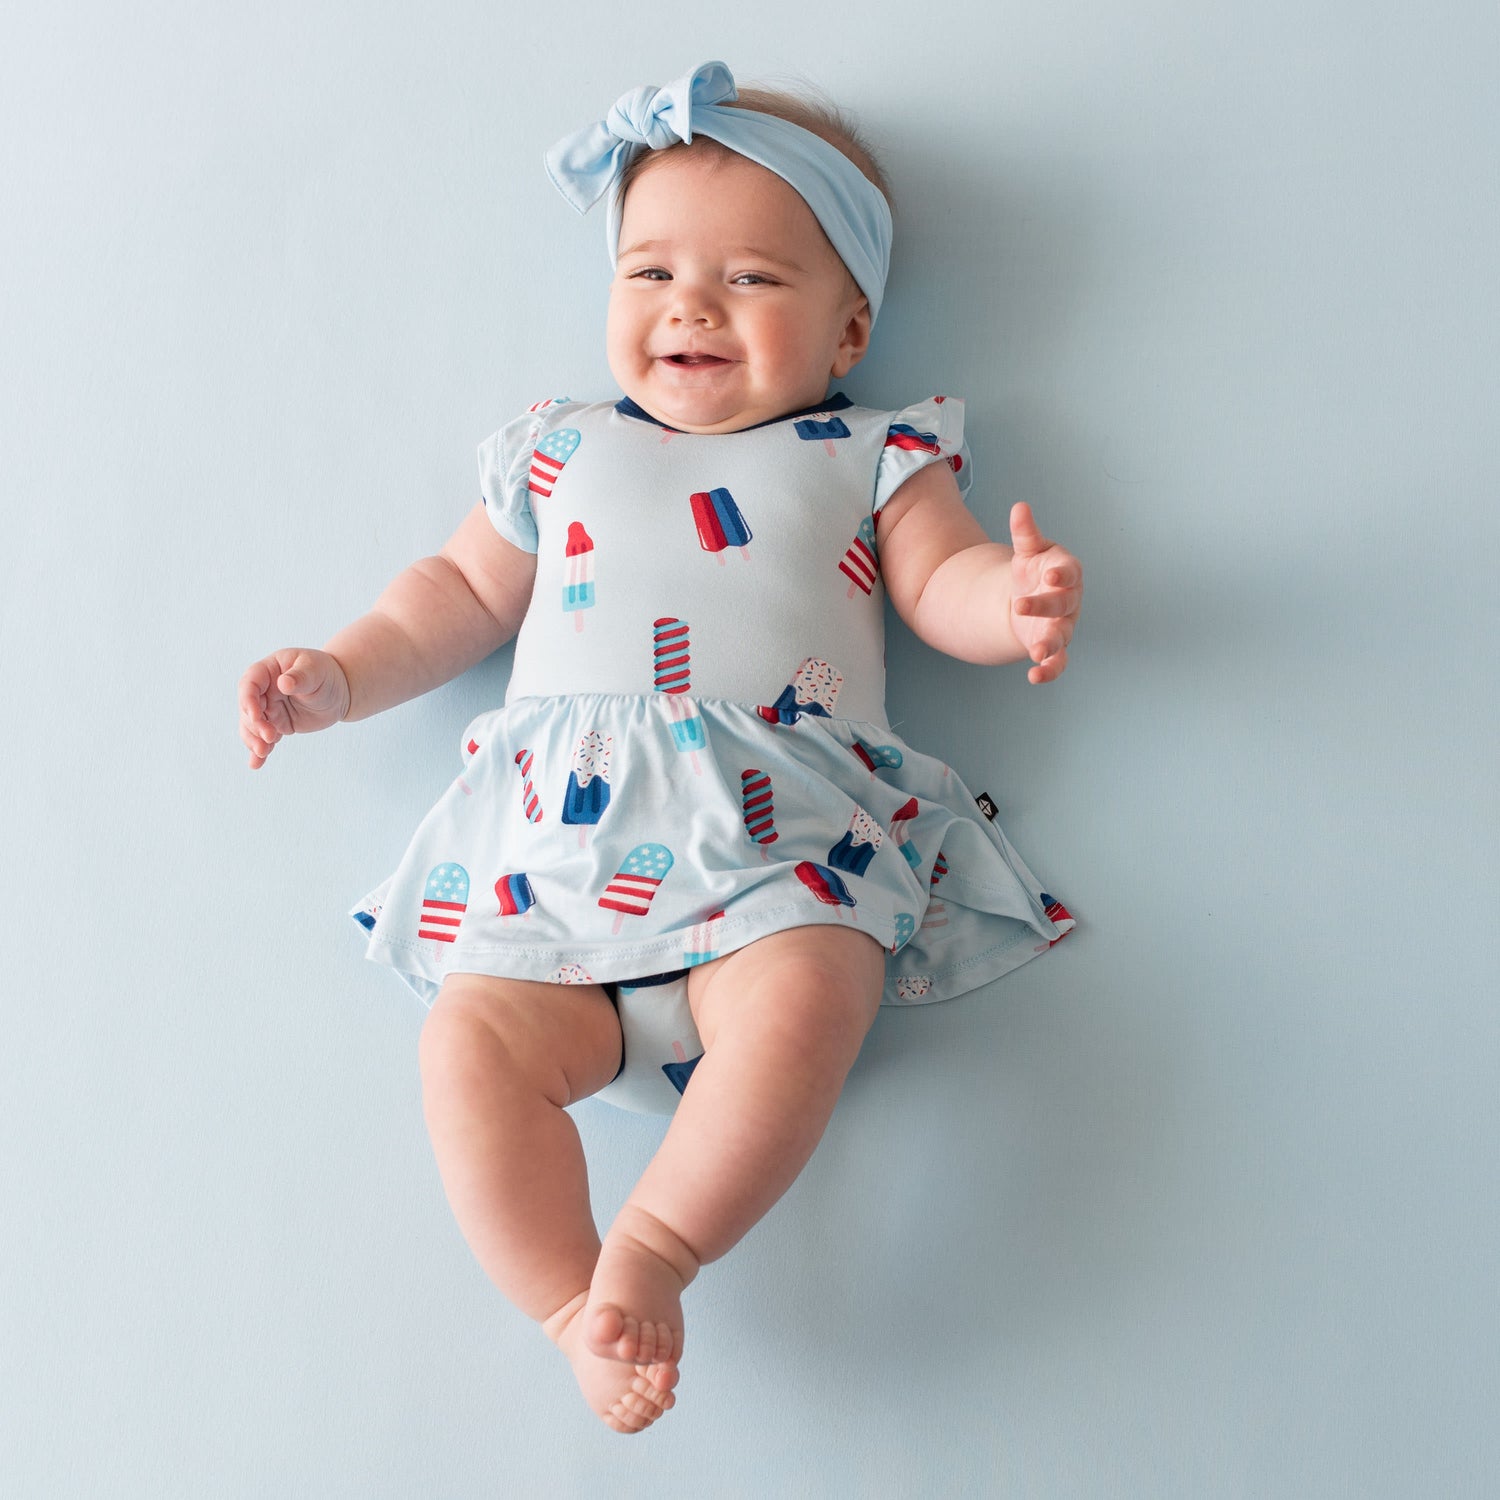 Tips to Help Your Baby Through 4th of July Fireworks